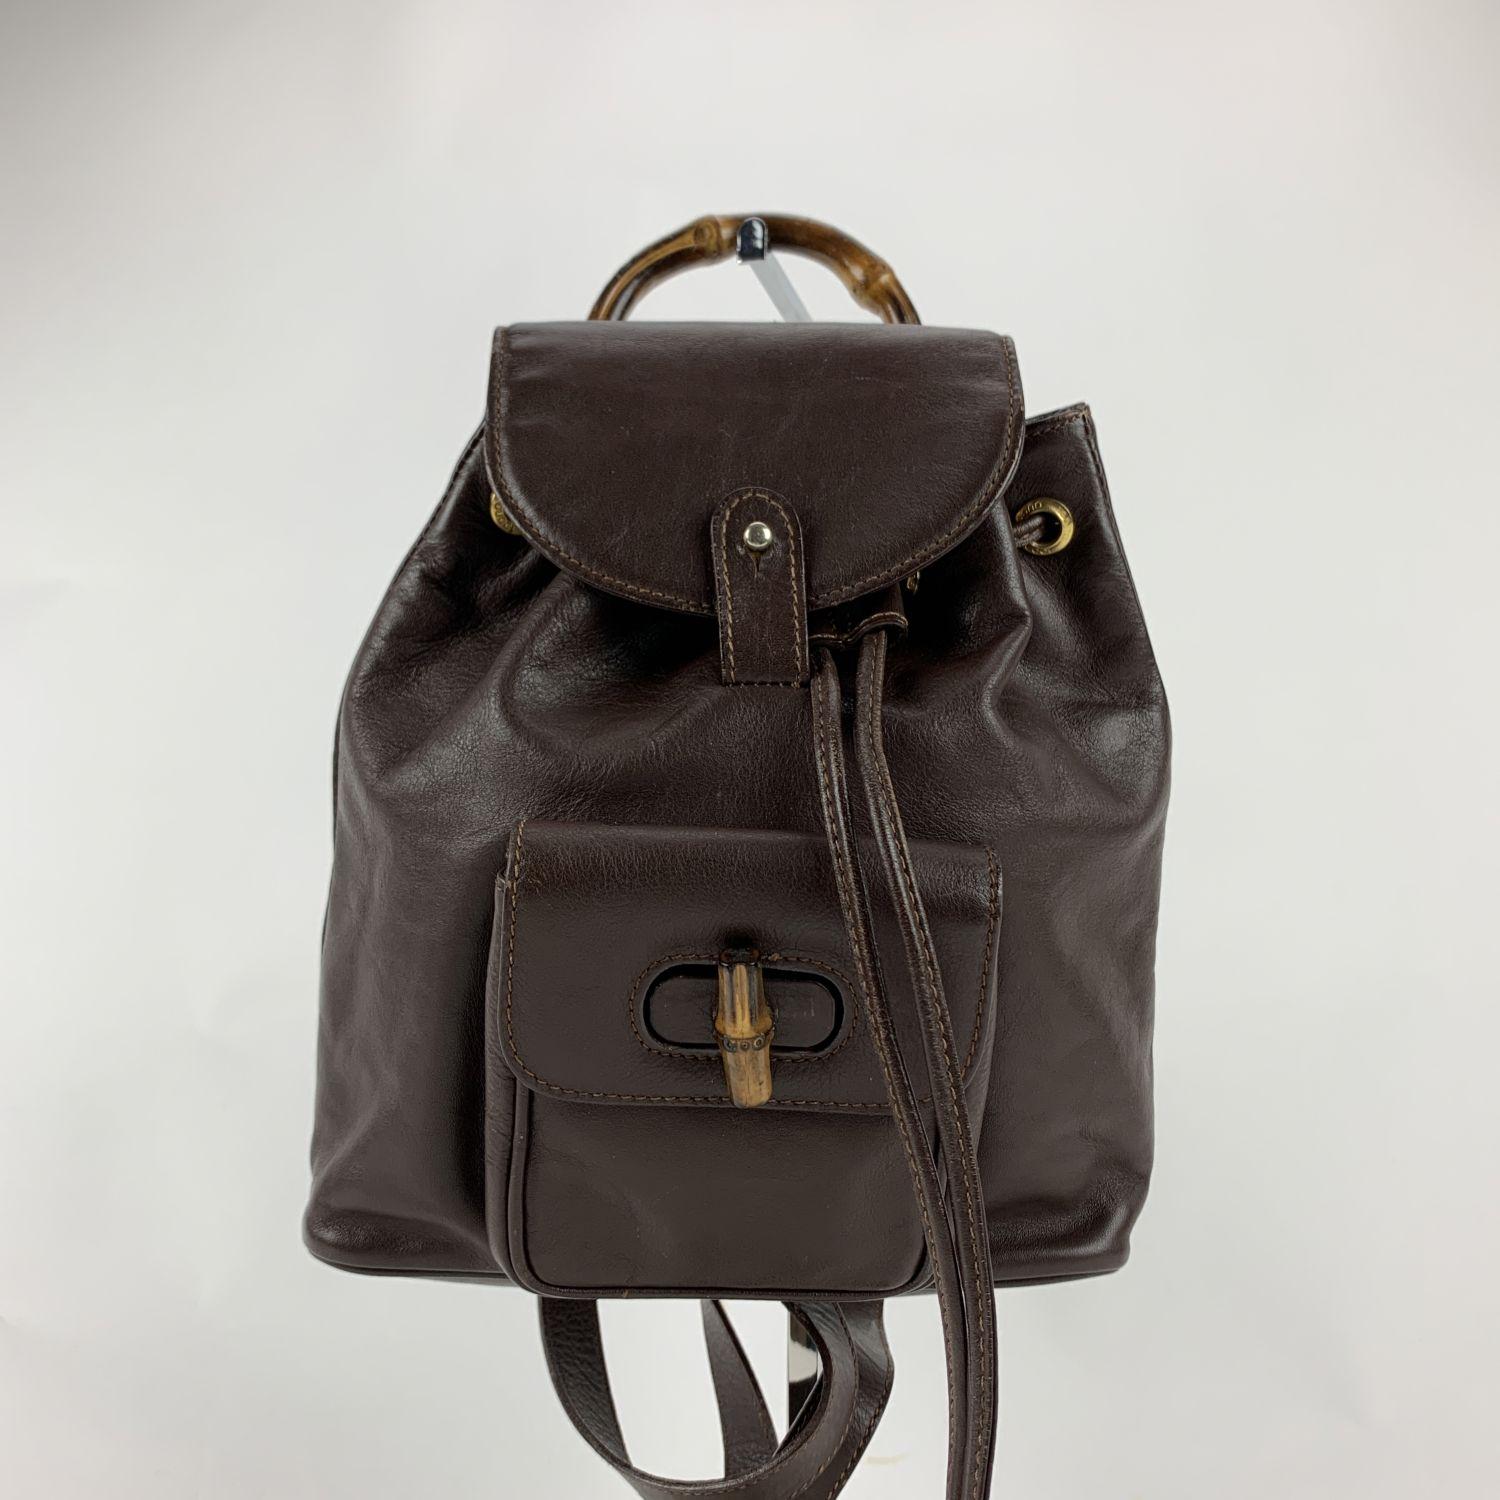 Vintage small backpack by Gucci, crafted in brown leather. It features Bamboo handle and and knob. 1 front pocket with twist lock closure. Flap closure and drawstring top opening. gold metal hardware. Internal diamond lining. 1 side zip pocket